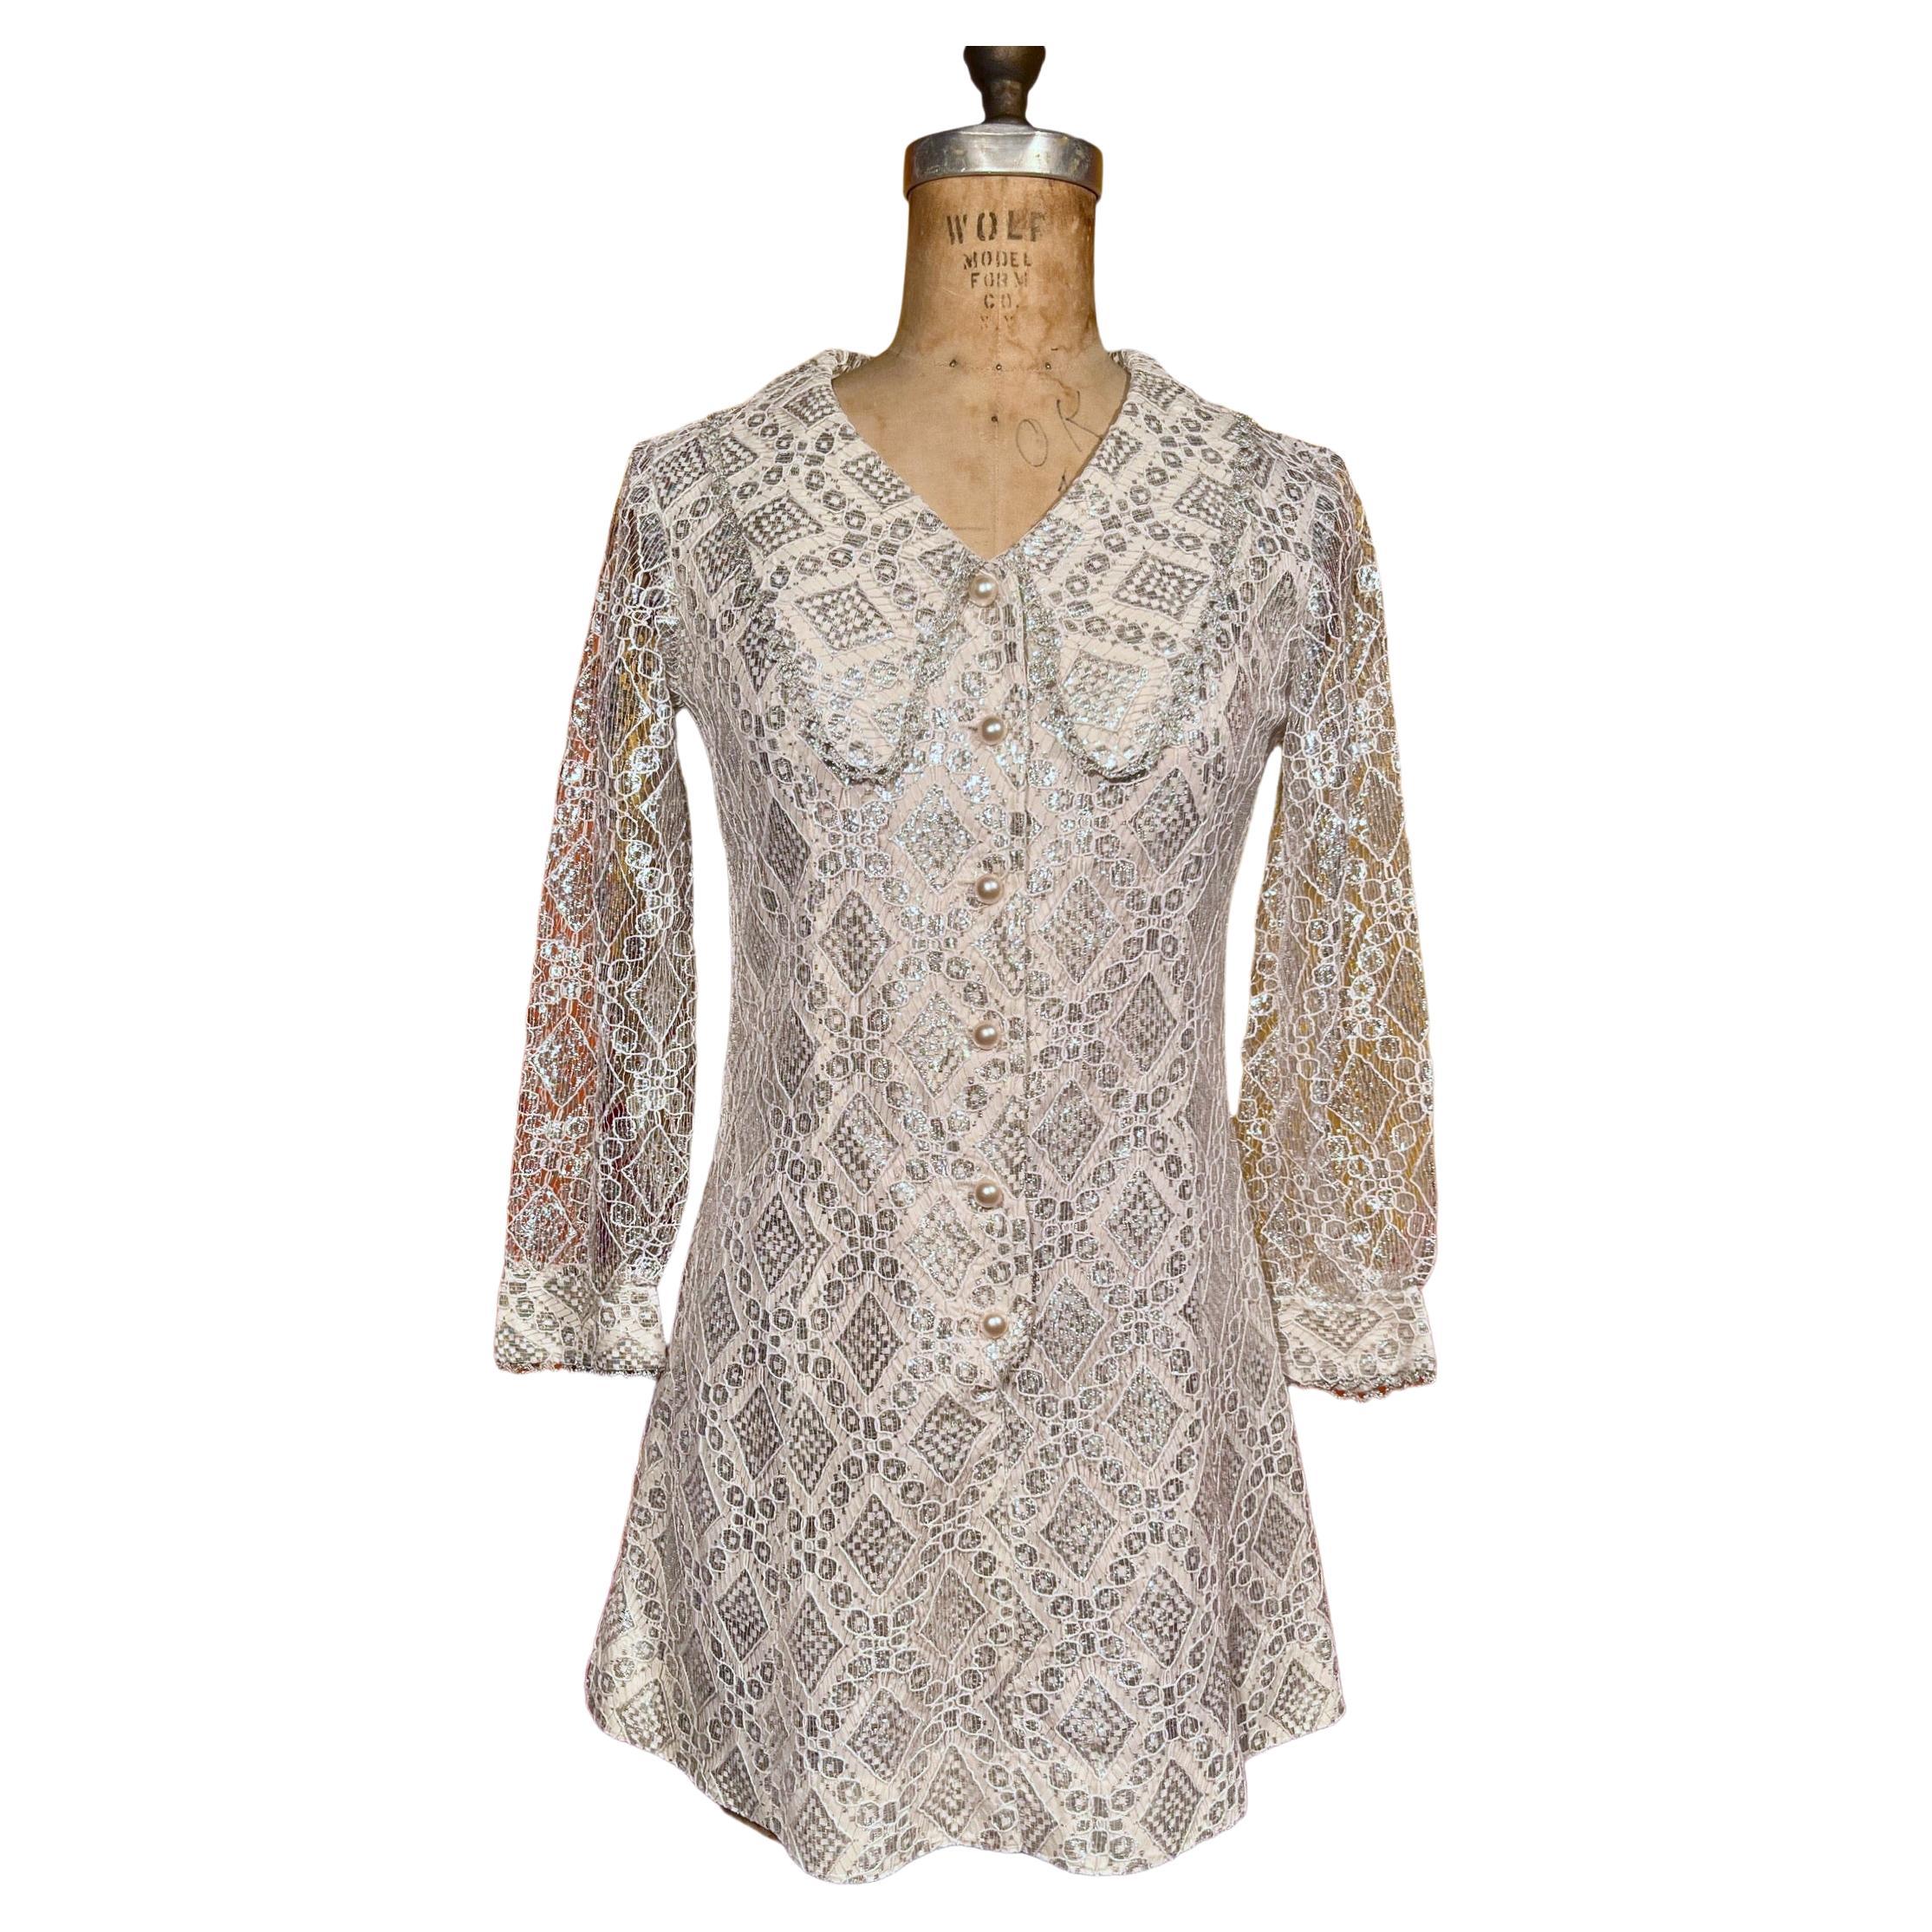 Incredible 1960’s silver metallic lace mini dress with white sleeveless lining, metallic threading, sheer sleeves, pearly buttons and dramatic wide lapels. No labels aside from 